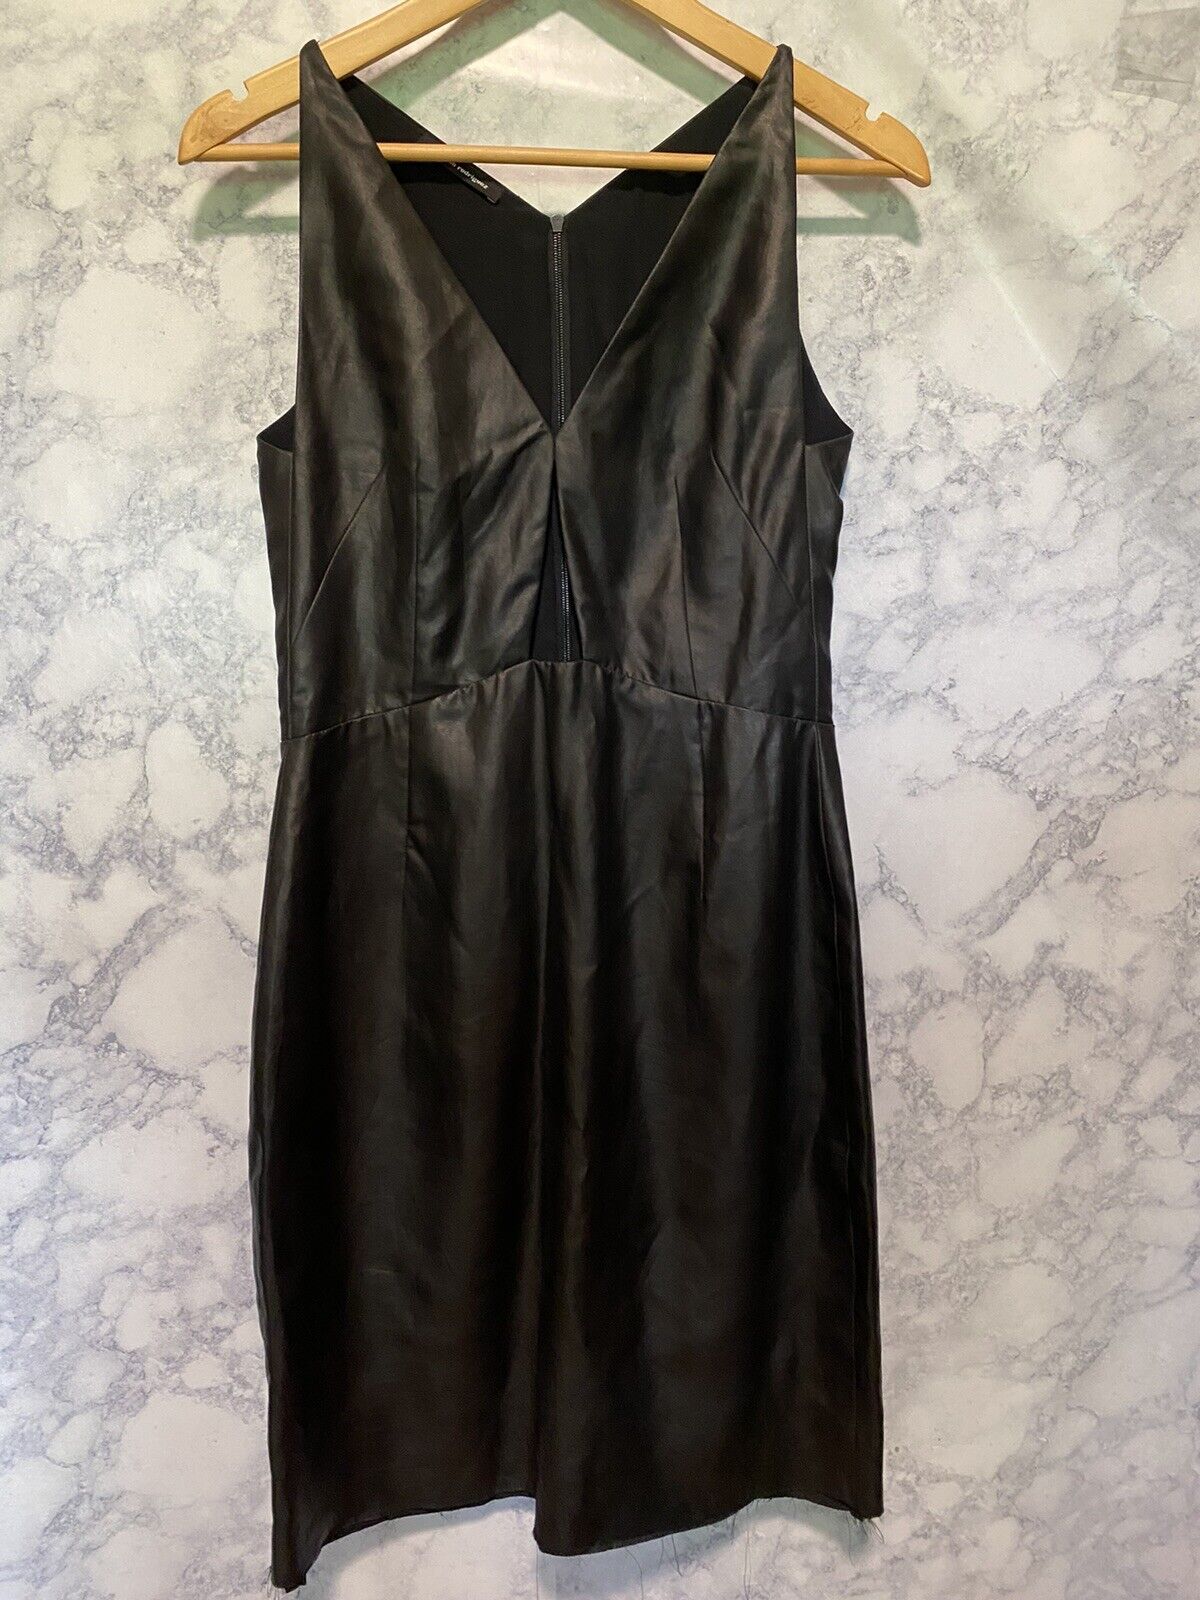 Narciso Rodriguez  Black Cocktail Dress Original Sample Leather Look Womens SZ ?